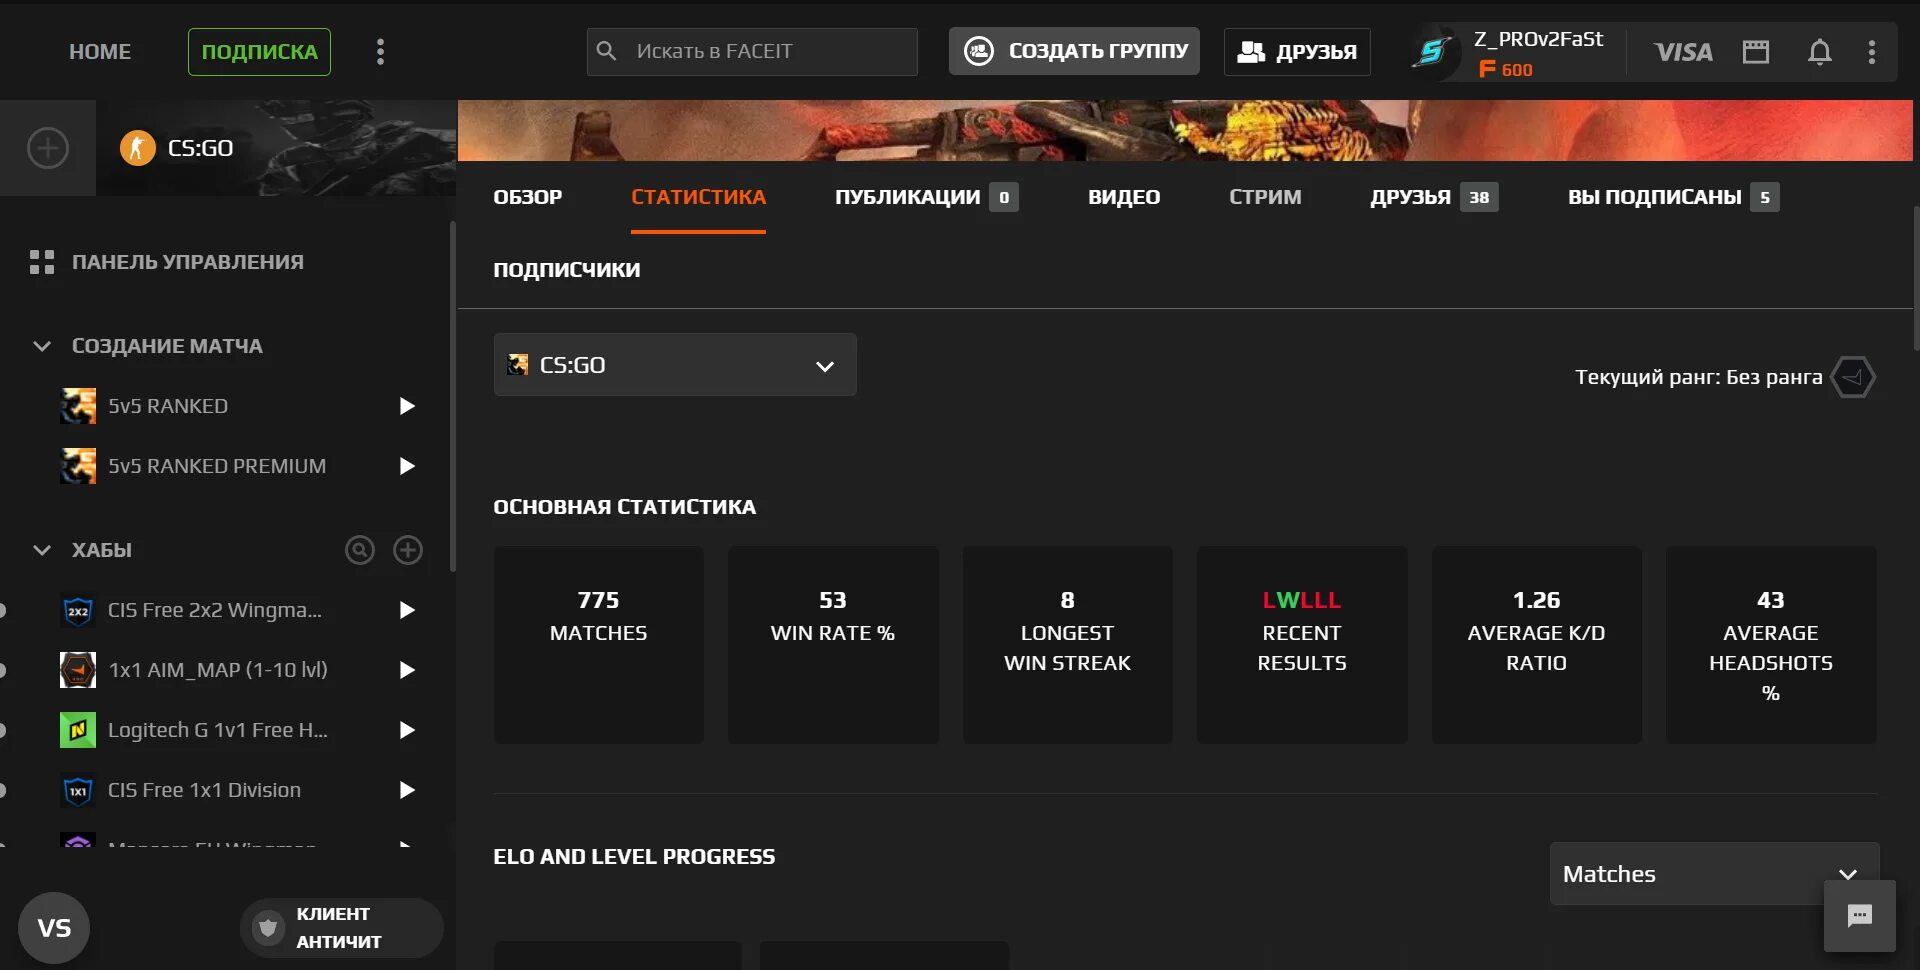 Something went wrong faceit. Фейсит. Фейсит аккаунт. Аккаунт фейсит 8 лвл. Подписка фейсит.